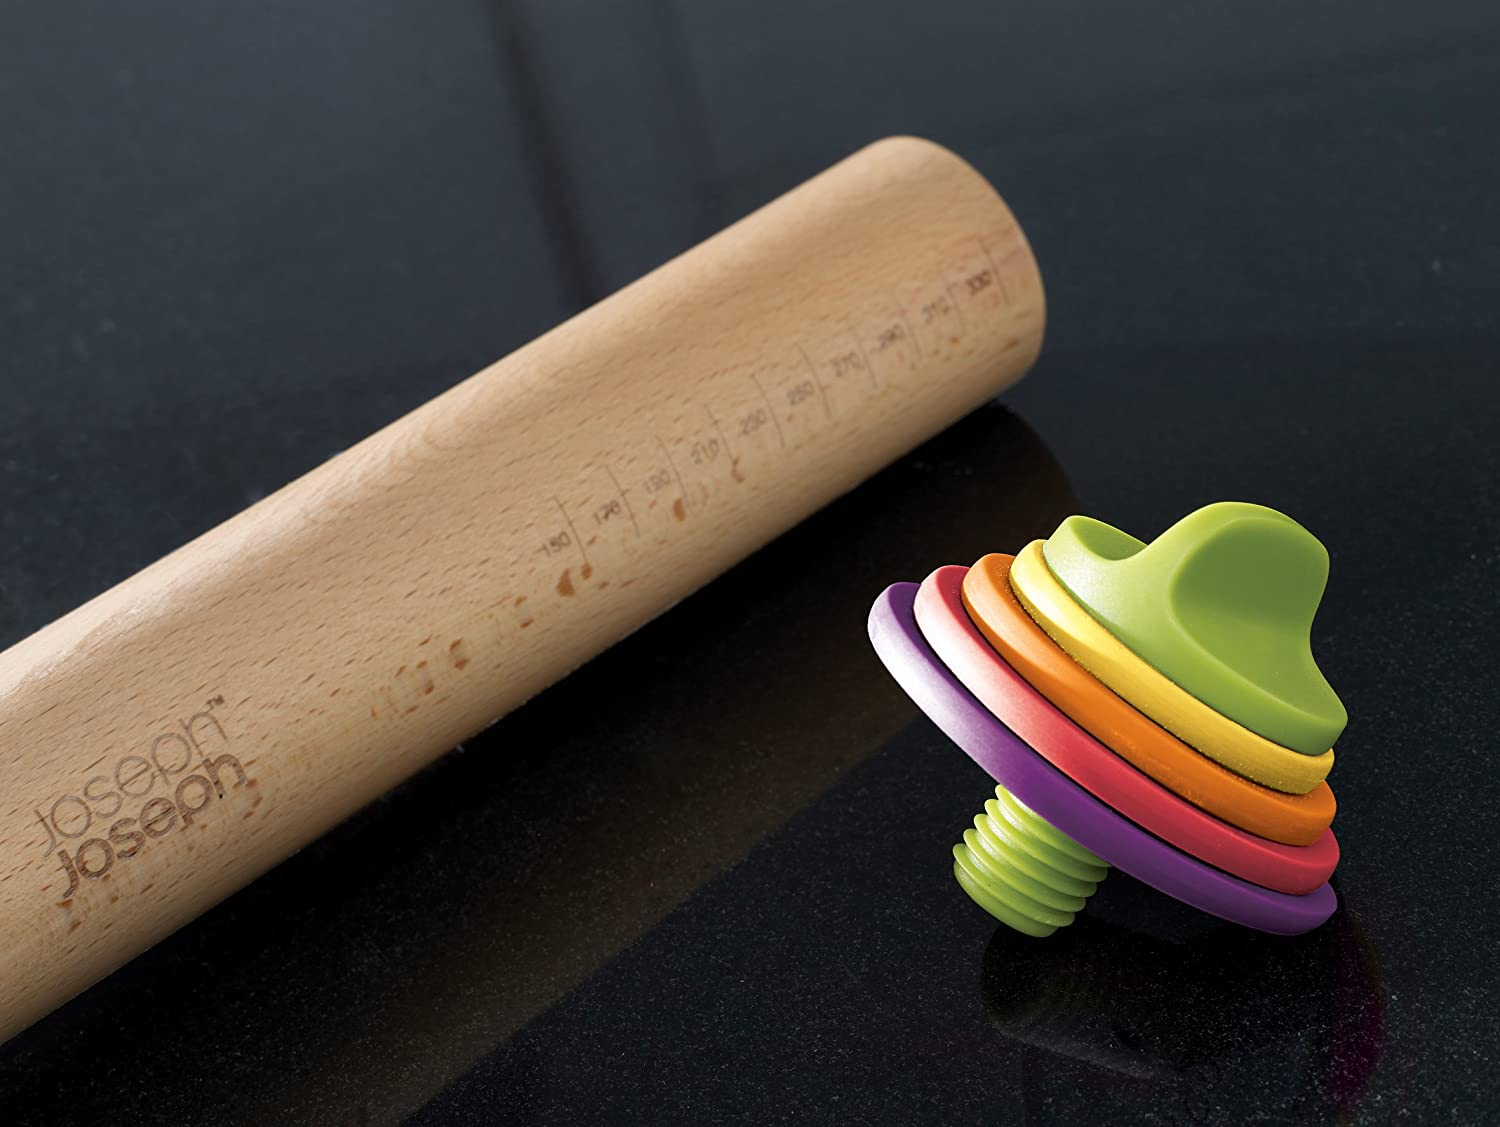 Adjustable Rolling Pin with Removable Rings